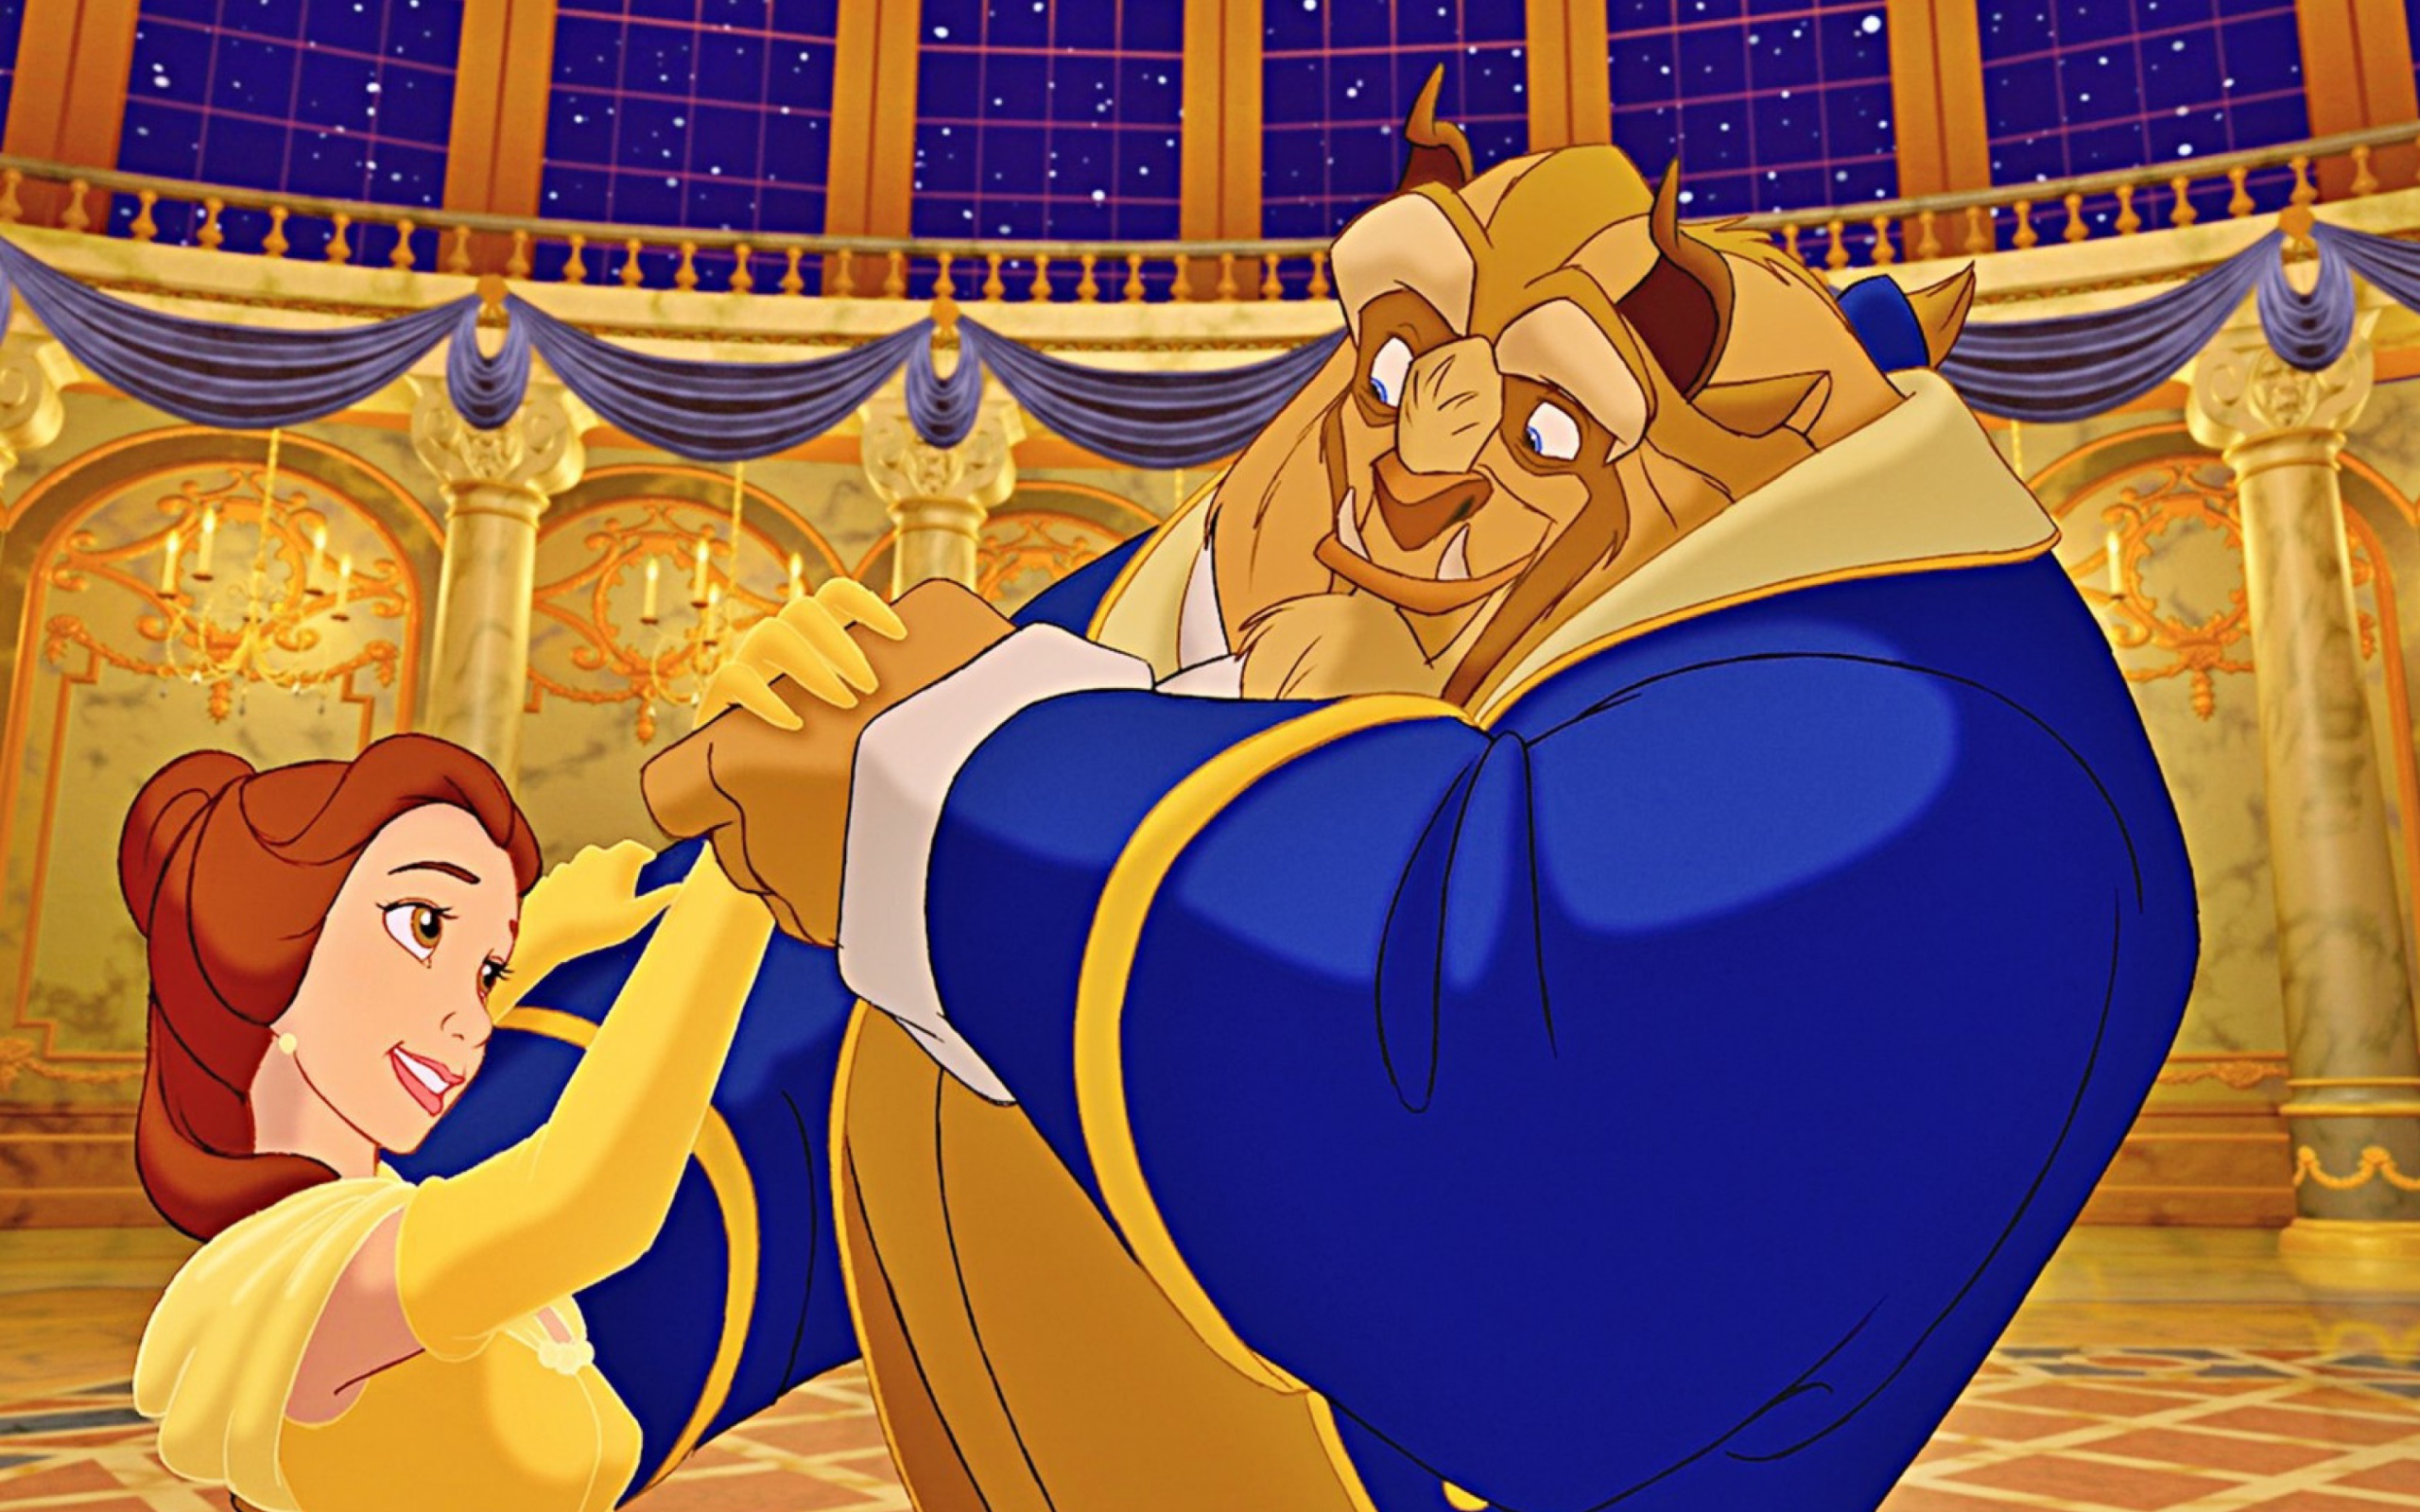 Beauty and The Beast wallpaper 2560x1600